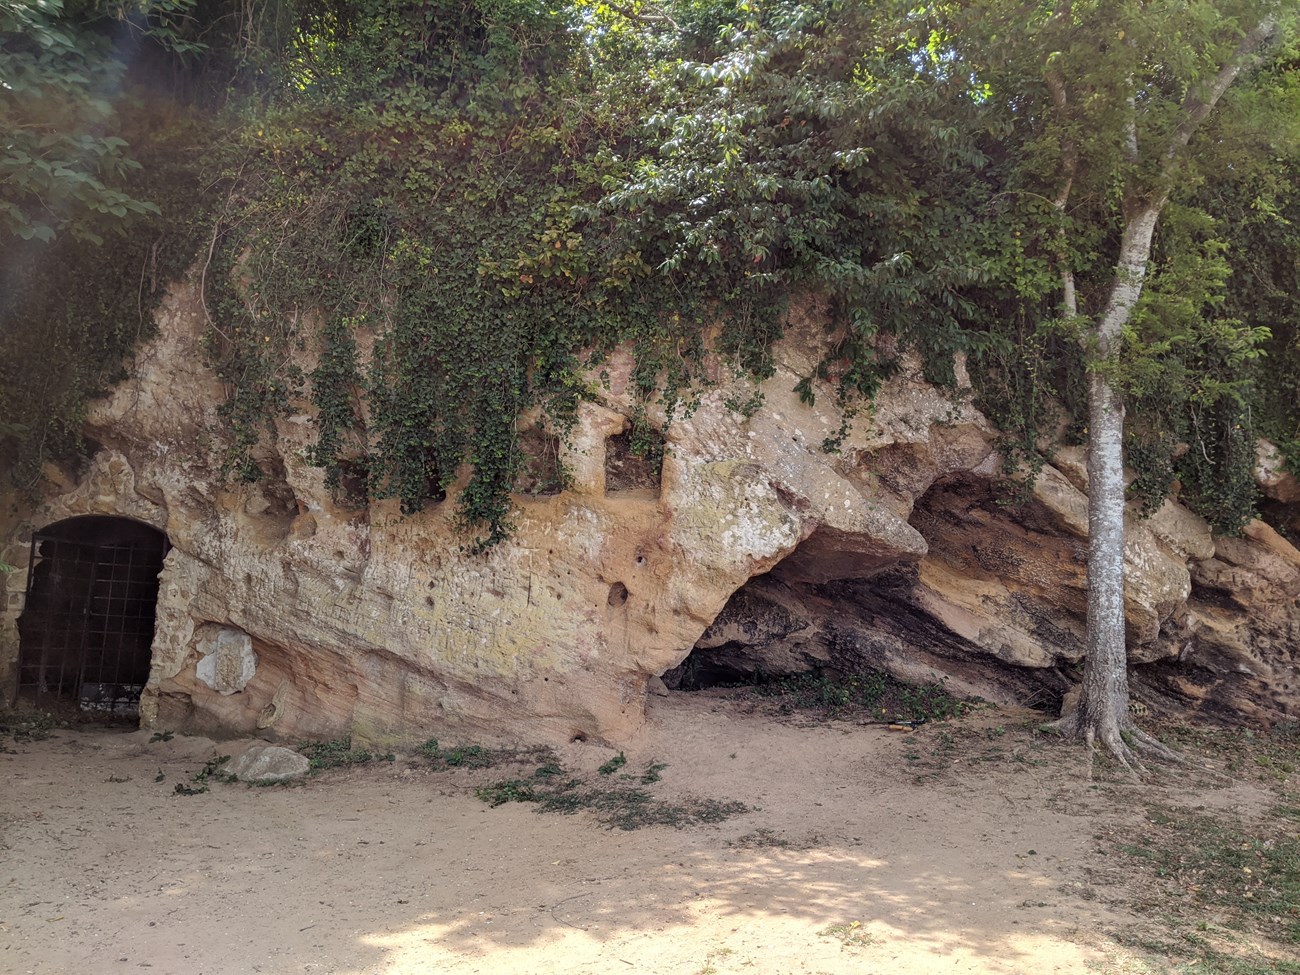 low bluff with cave openings